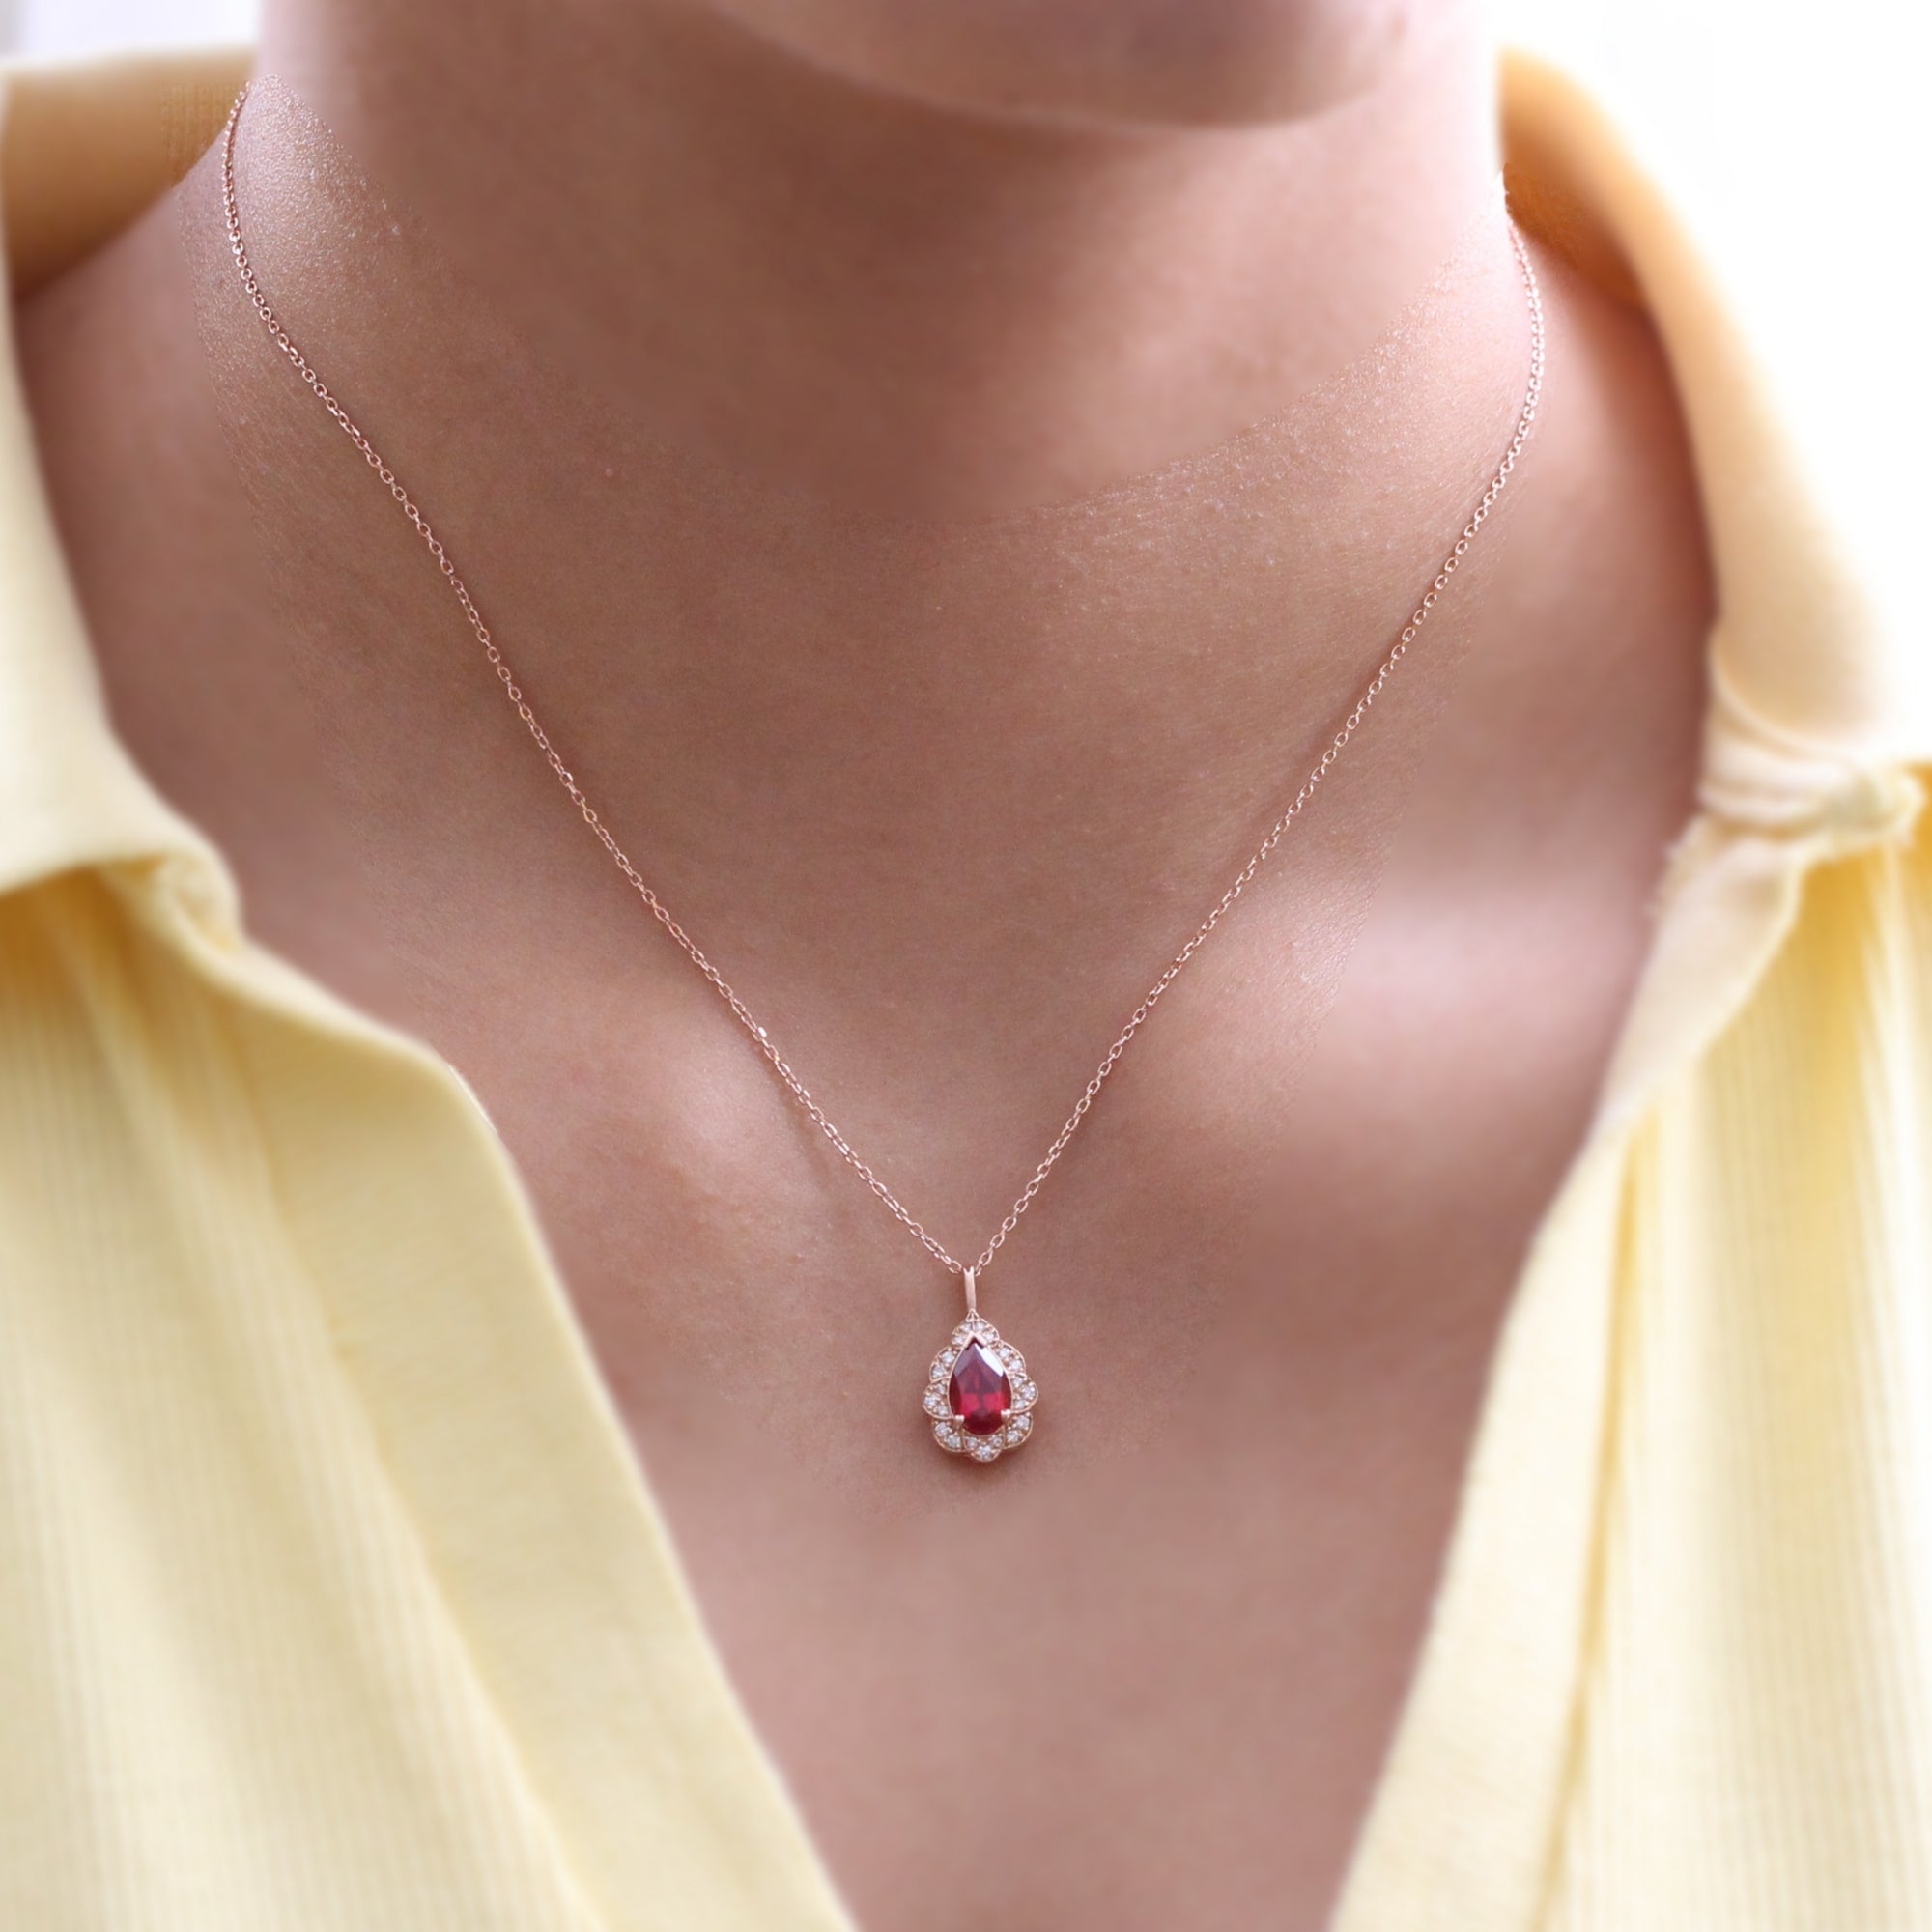 14 k Yellow Gold Ruby Pendant For Her At Best Price